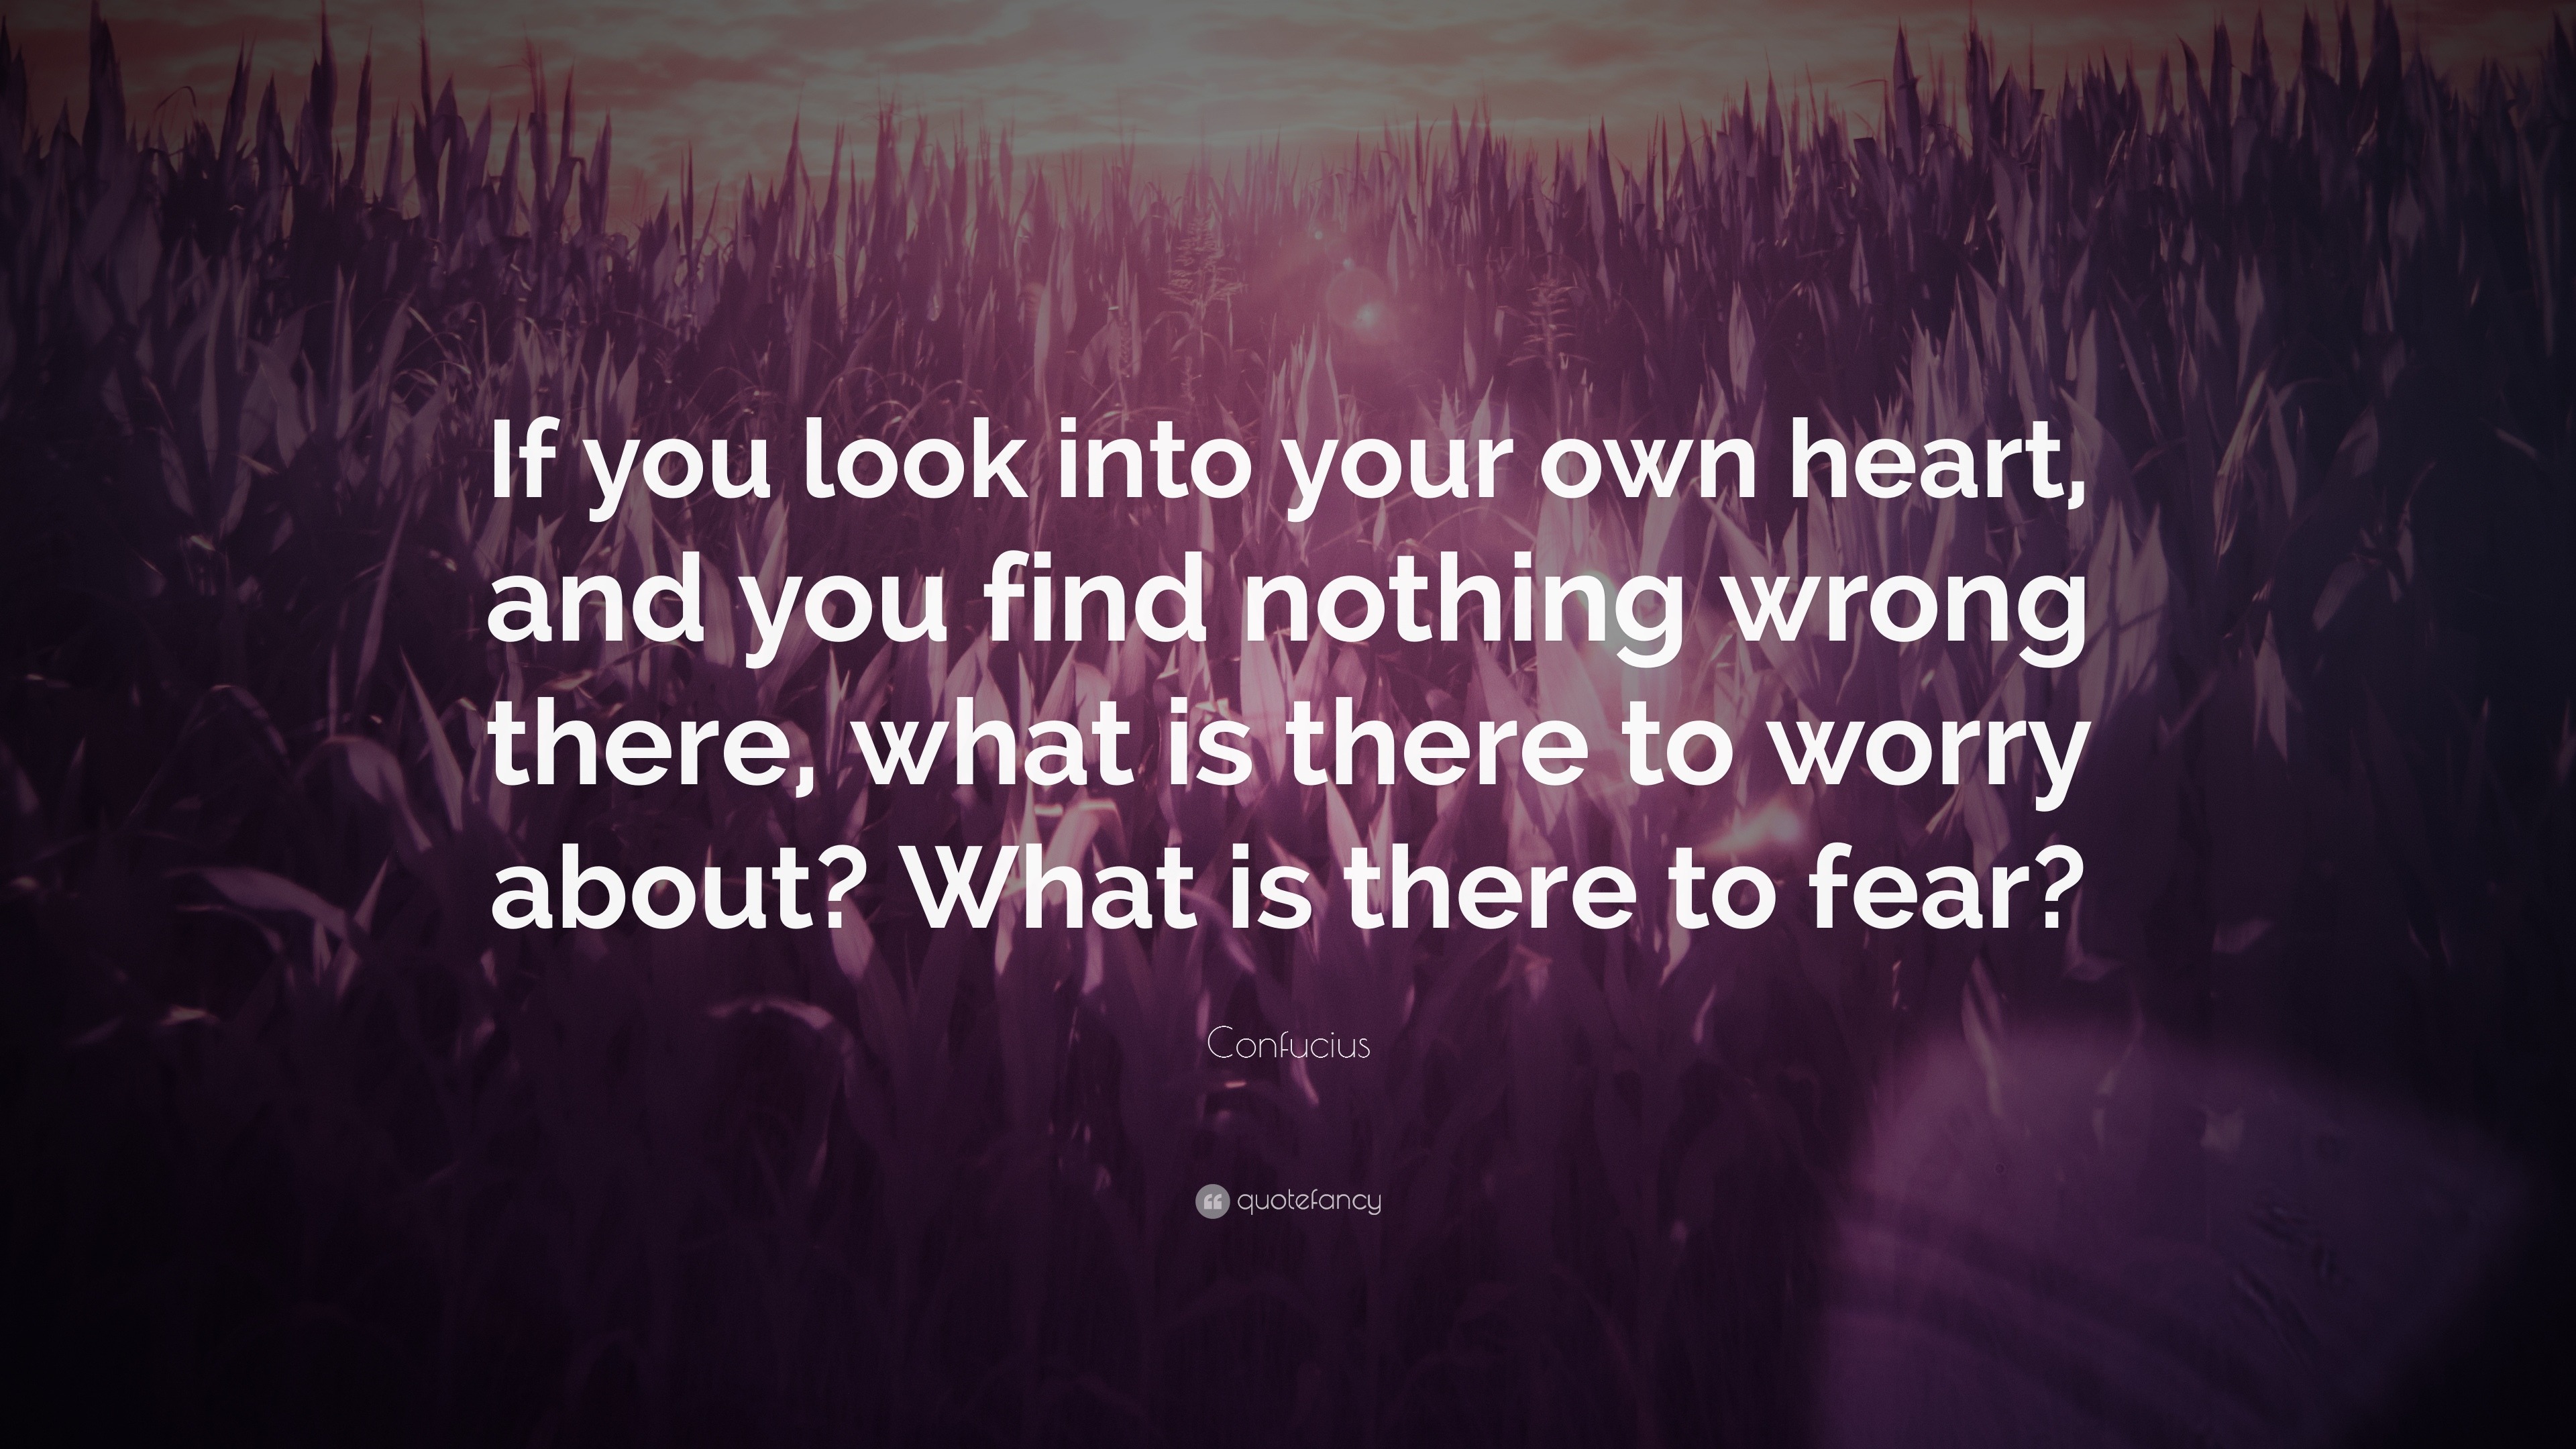 Fear Quotes “If you look into your own heart and you find nothing